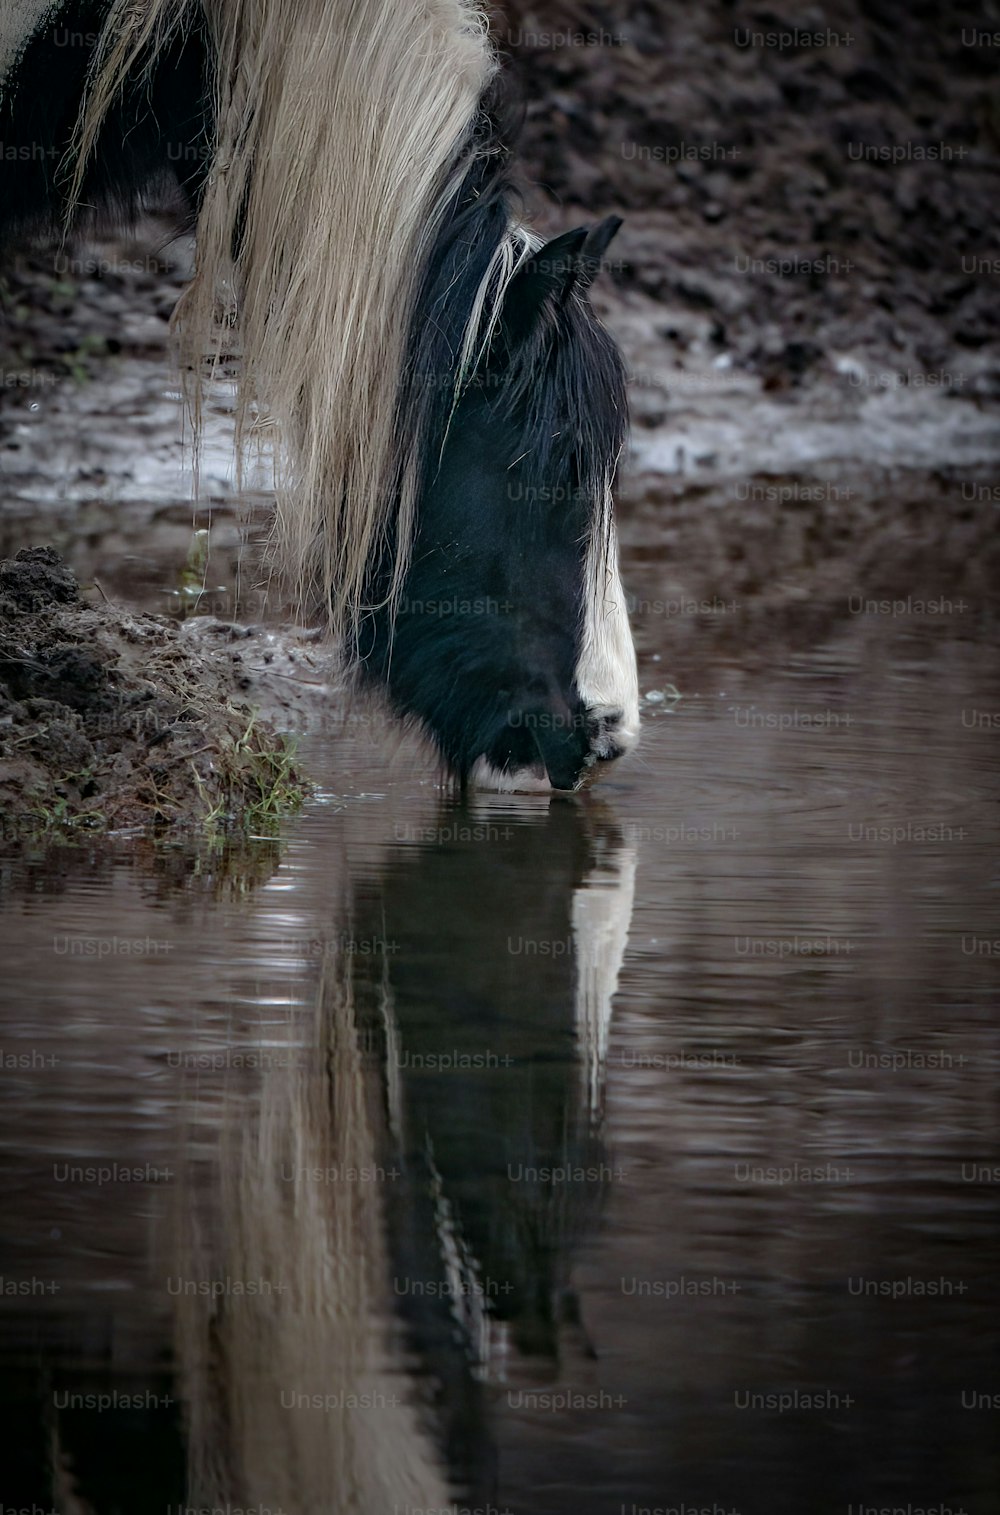 a black and white horse drinking water from a pond